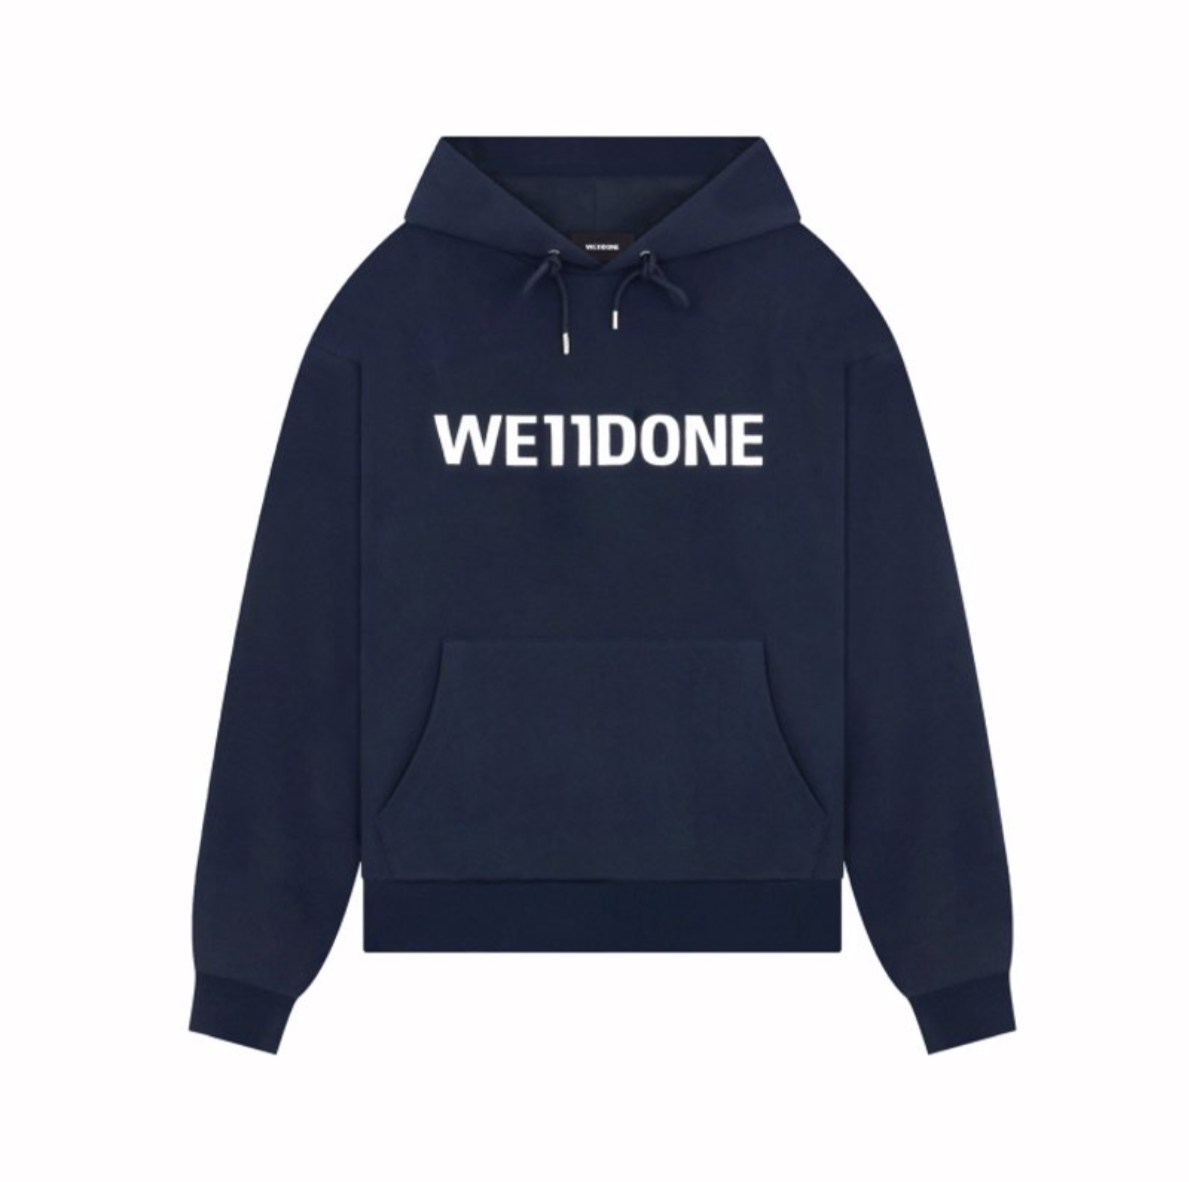 WE11DONE Navy Fitted Basic Hoodie